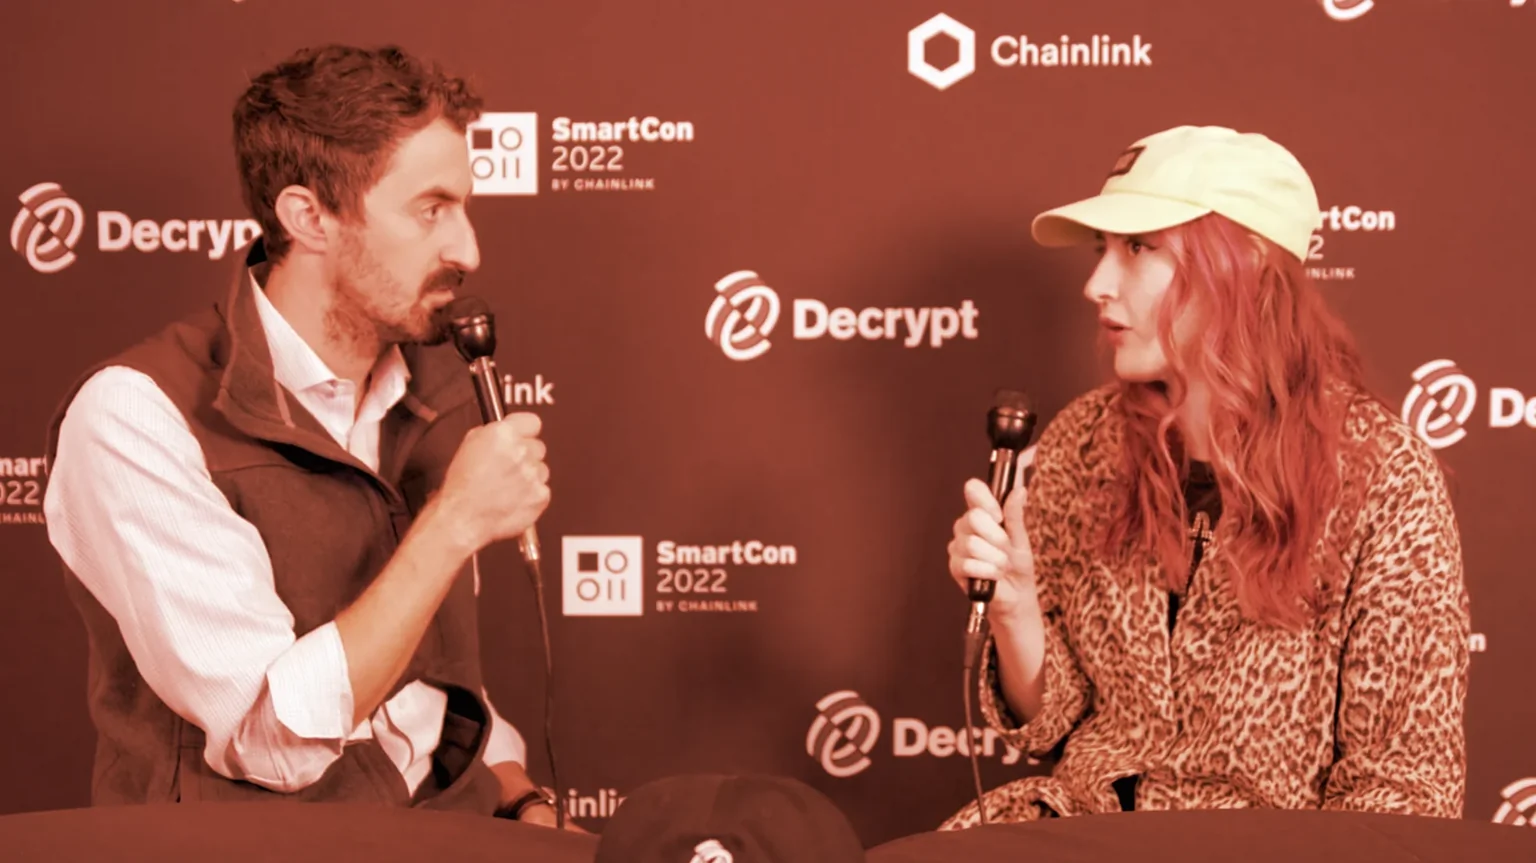 PussyDAO's Izzy Howell speaks with Decrypt's Dan Roberts at SmartCon 2022. Image: Decrypt